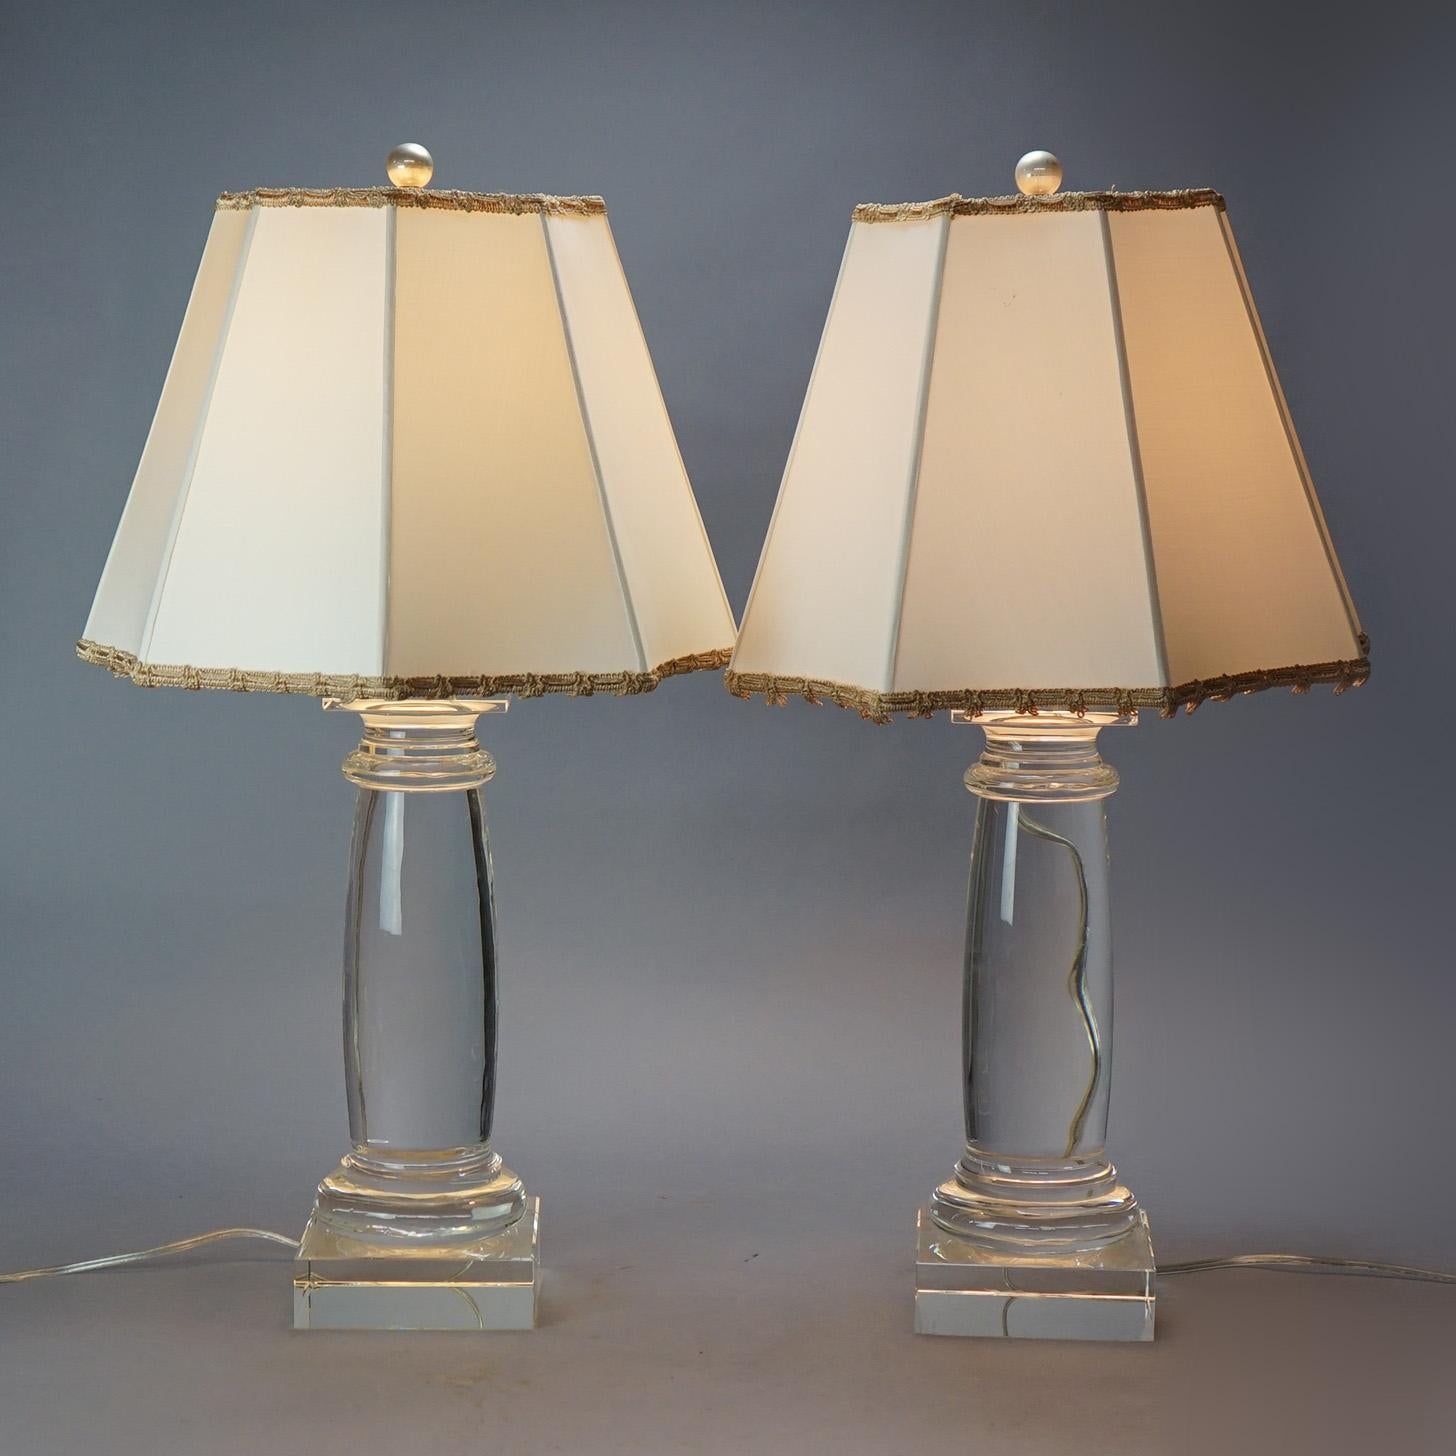 Matching Pair of Baccarat School Classical Doric Column Form Crystal Table Lamps 20th C

Measure- 32''H x 18.5''W x 18.5''D